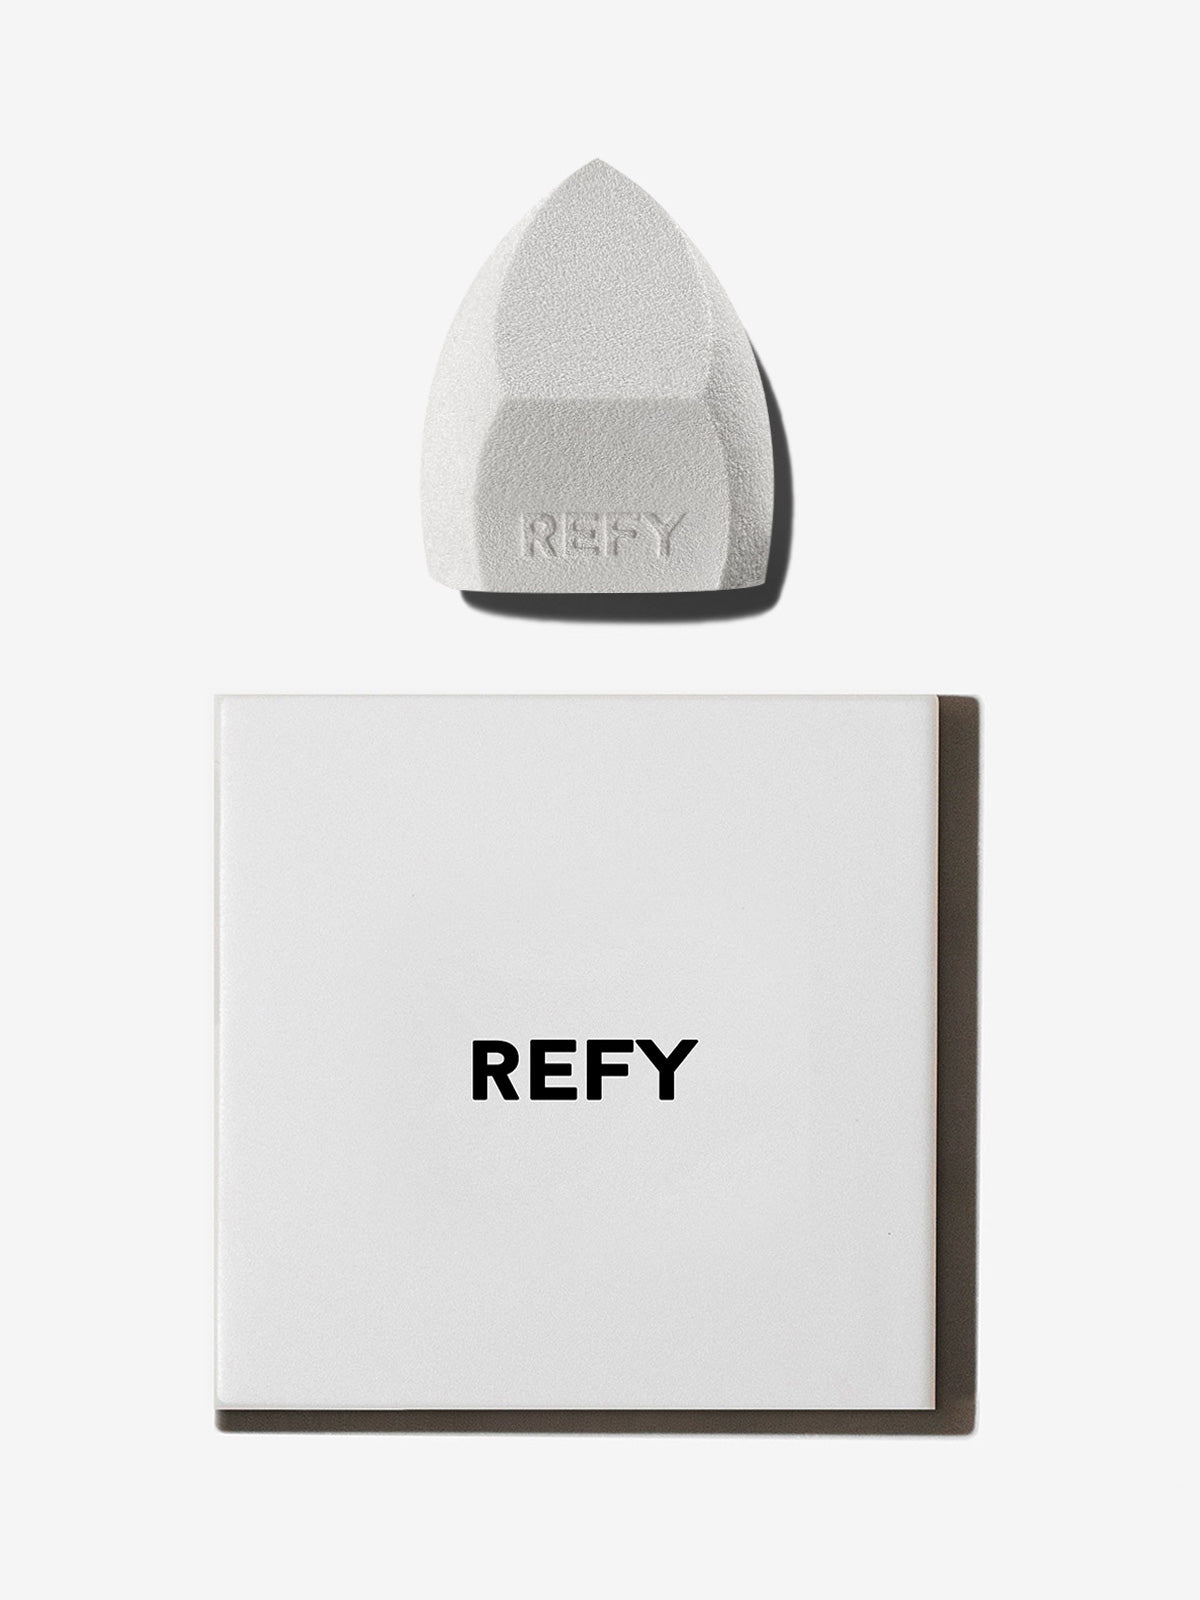 FRONT IMAGE OF REFY SKIN FINISH SET. CONTAINS REFY SKIN FINISH AND BEAUTY SPONGE